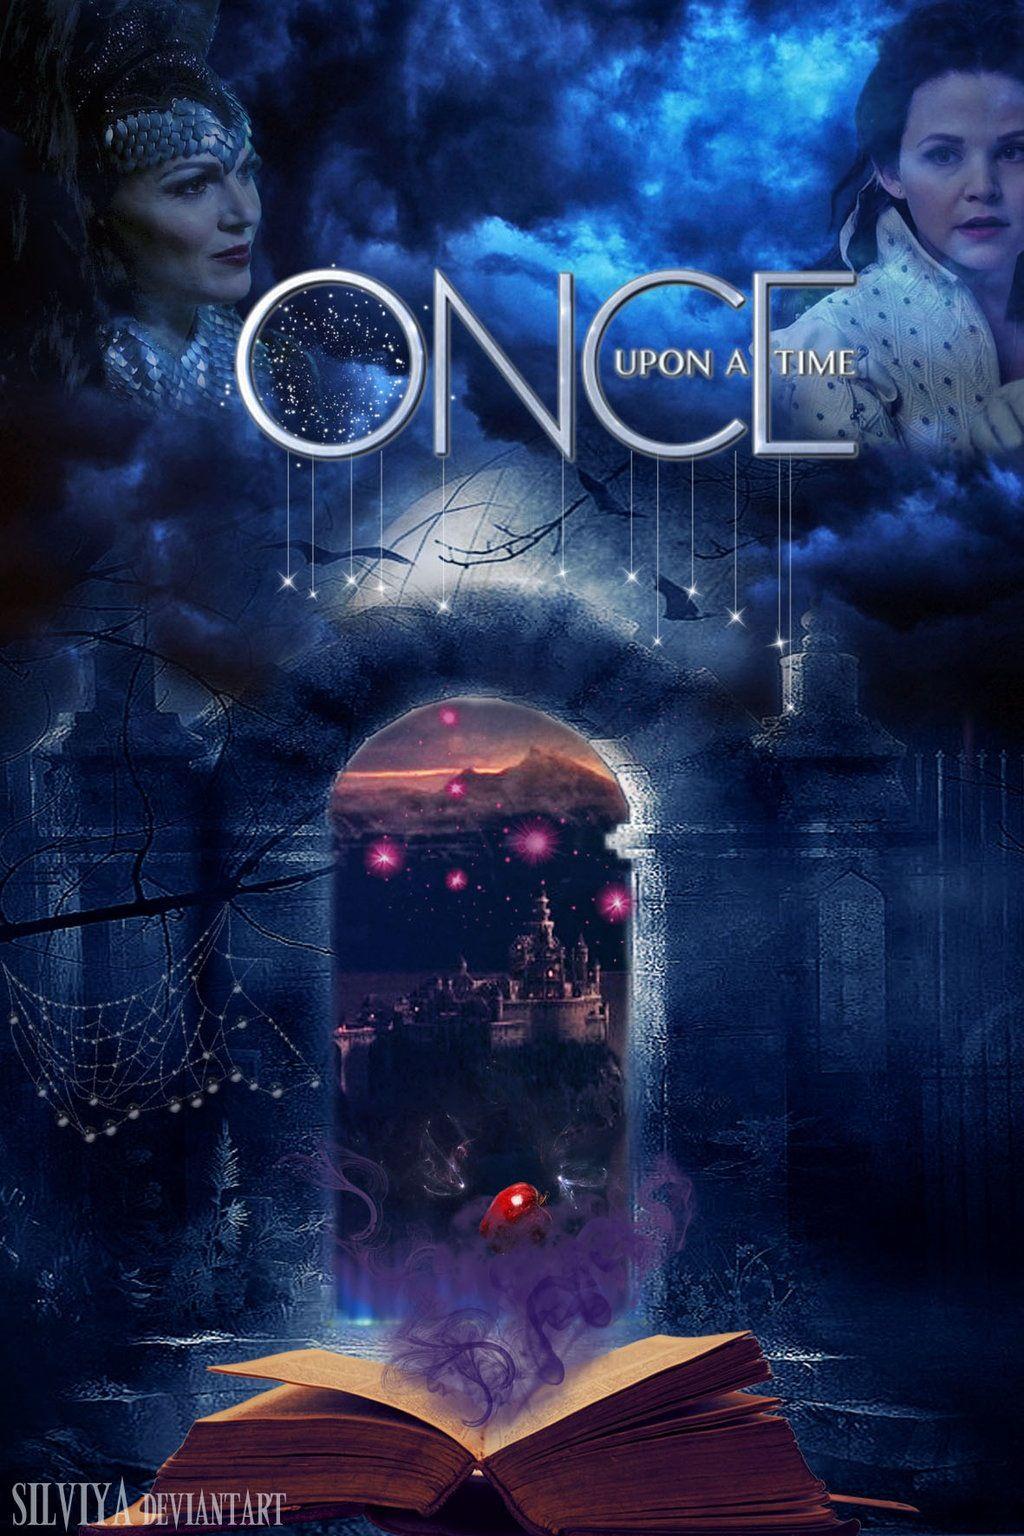 Cool Once Upon A Time Wallpaper. Once Upon A Time